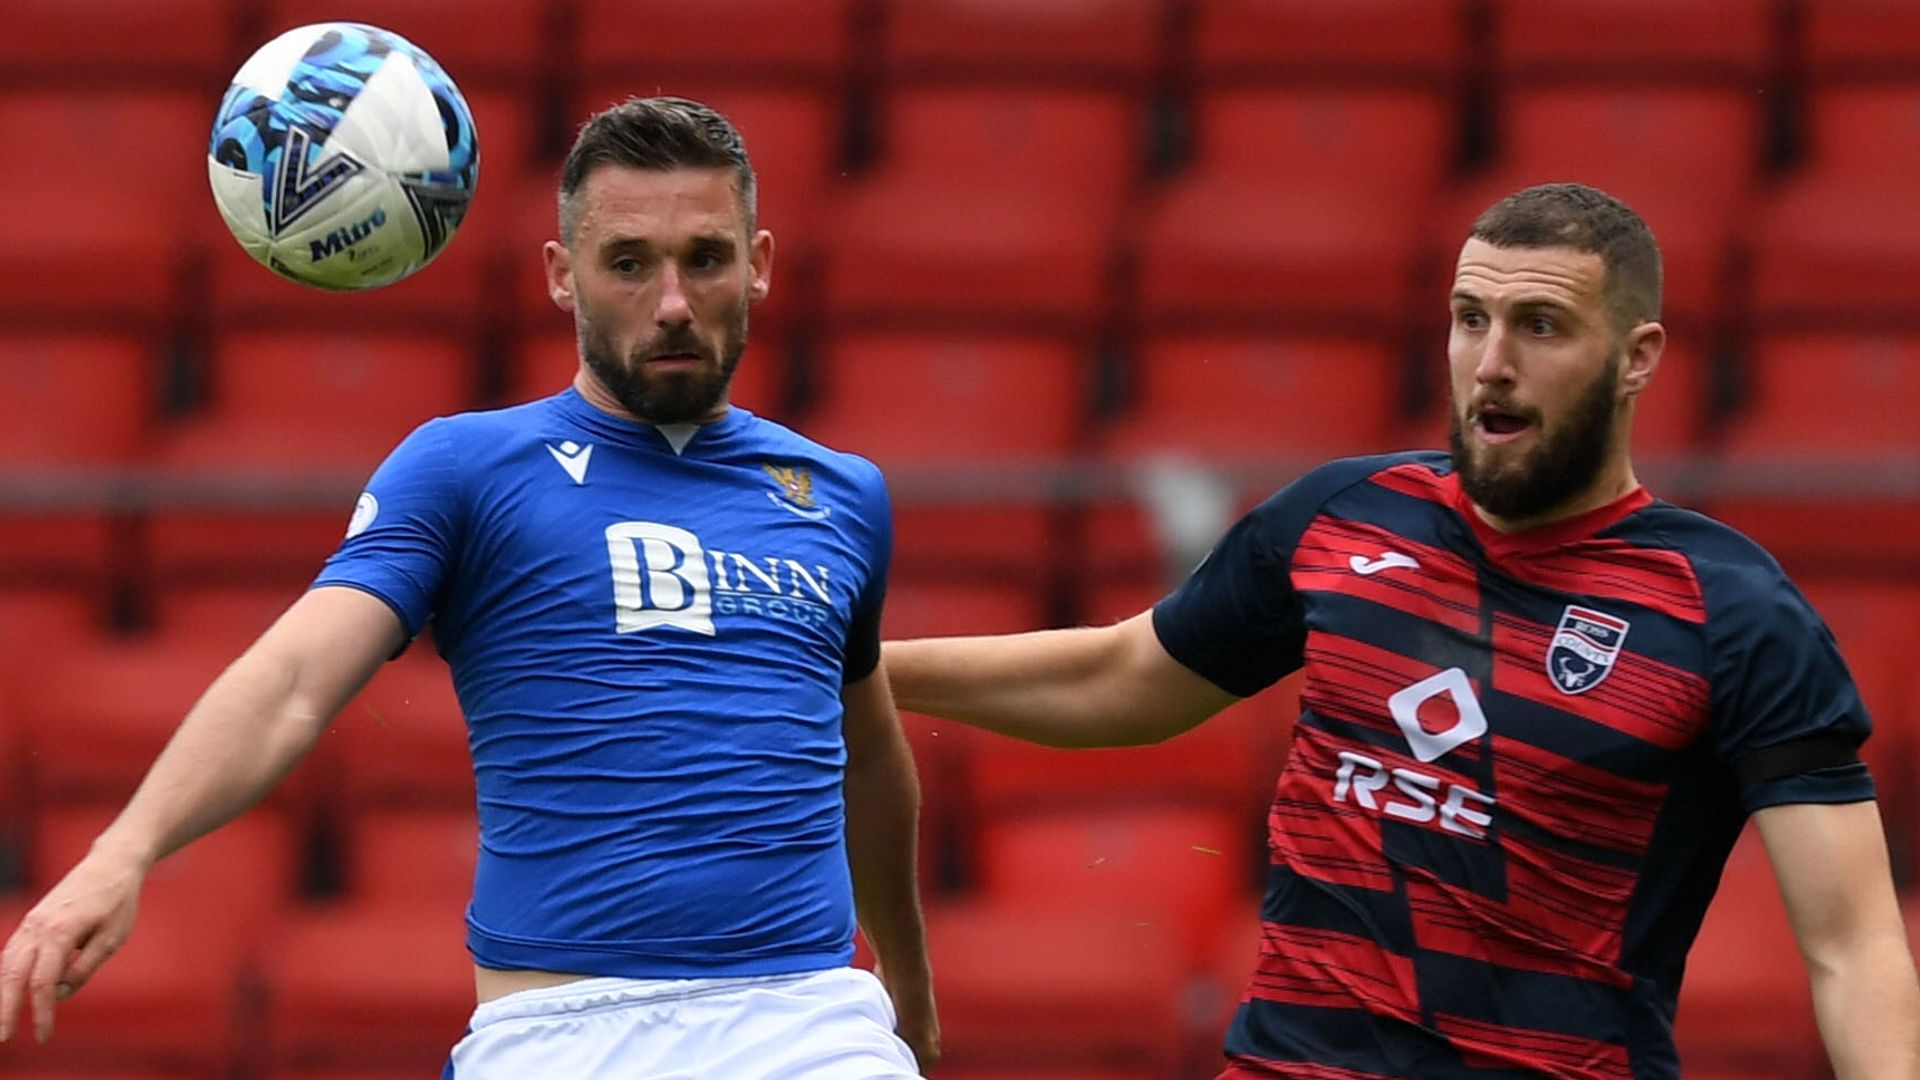 St Johnstone & Ross County play out lively goalless draw